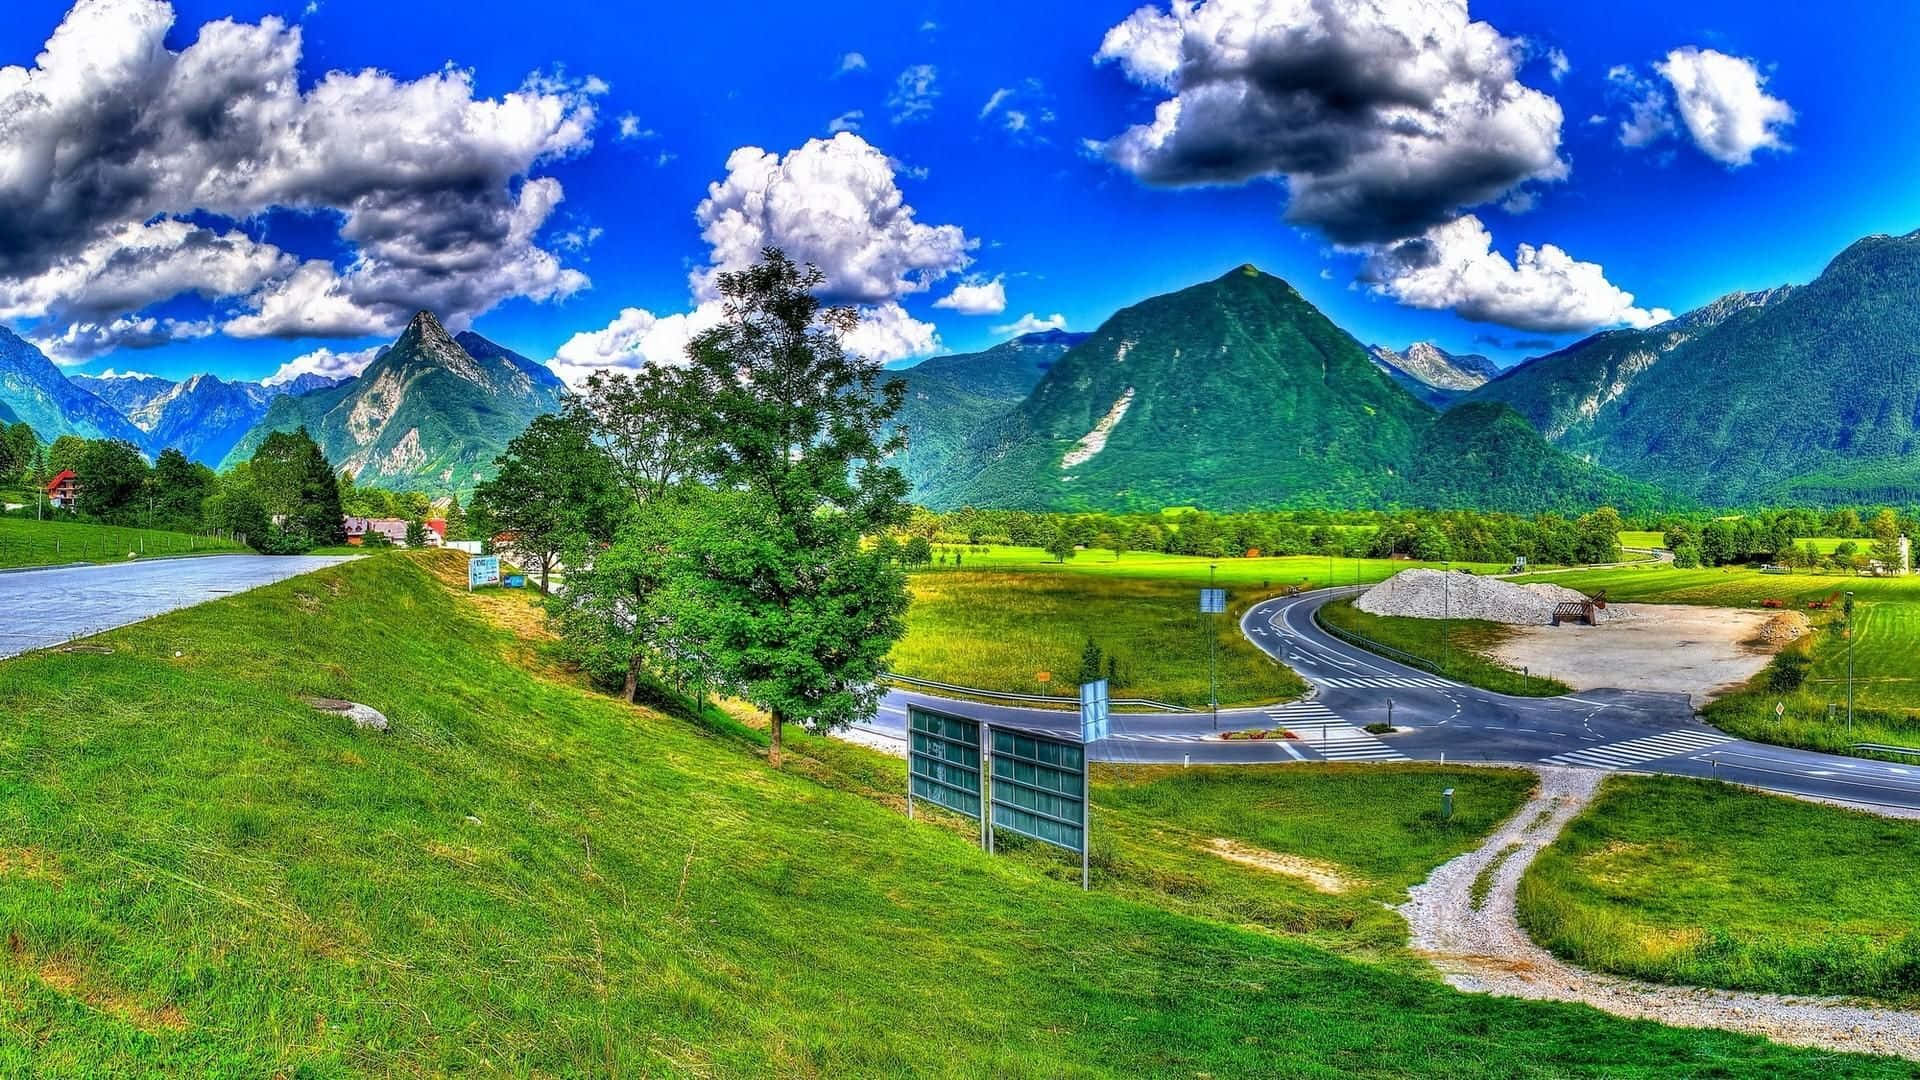 A View Of A Mountain Road And A Green Field